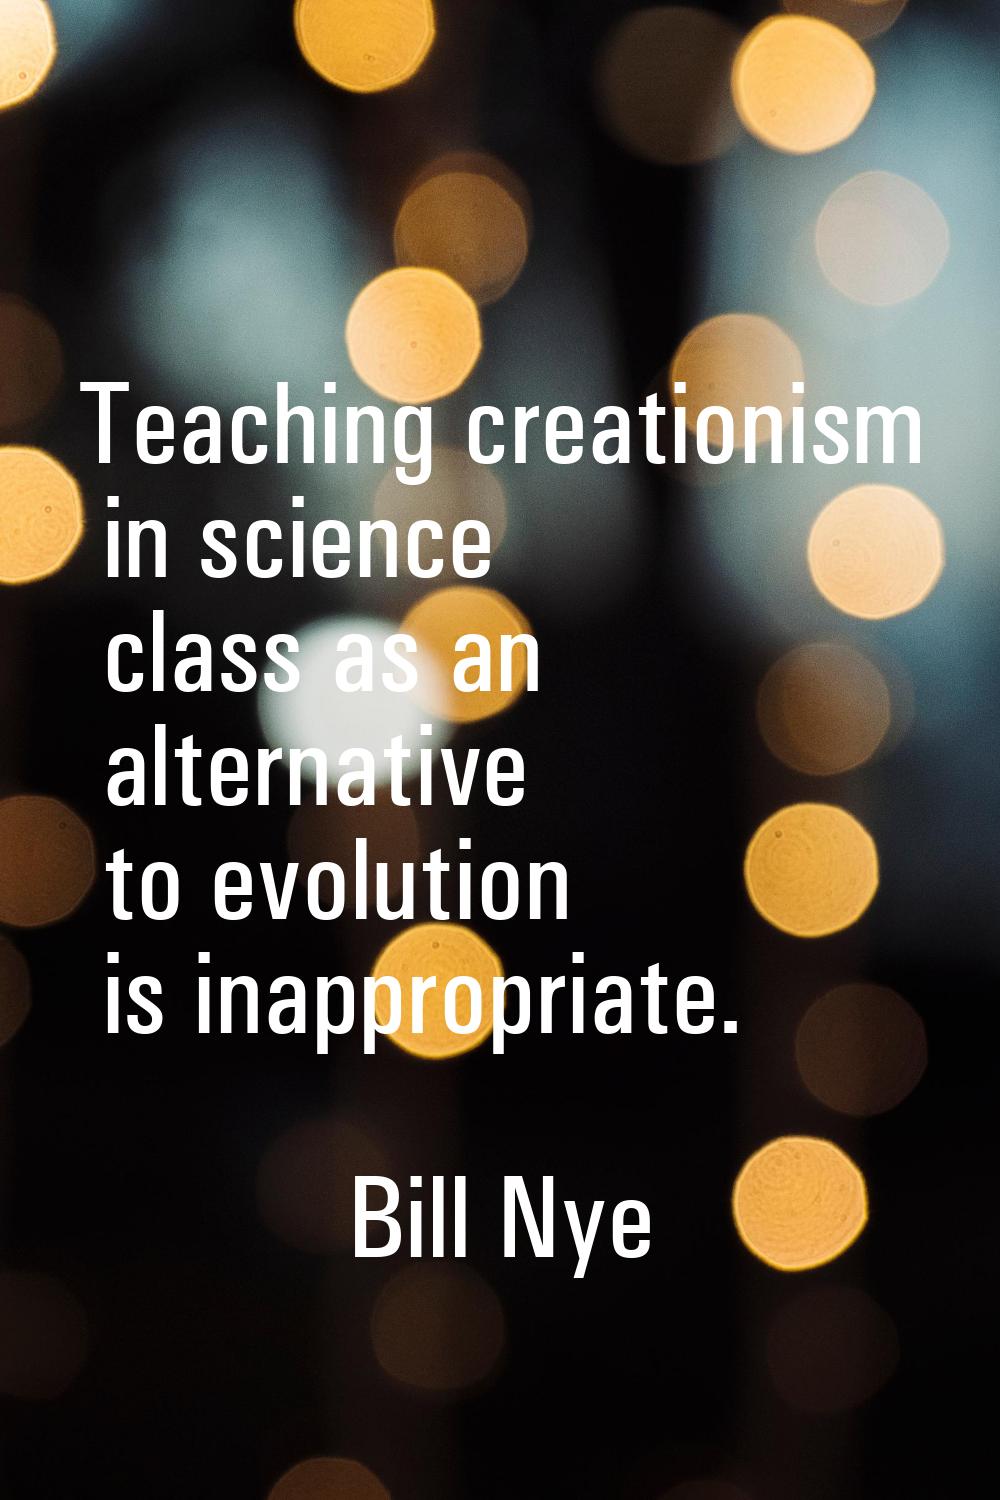 Teaching creationism in science class as an alternative to evolution is inappropriate.